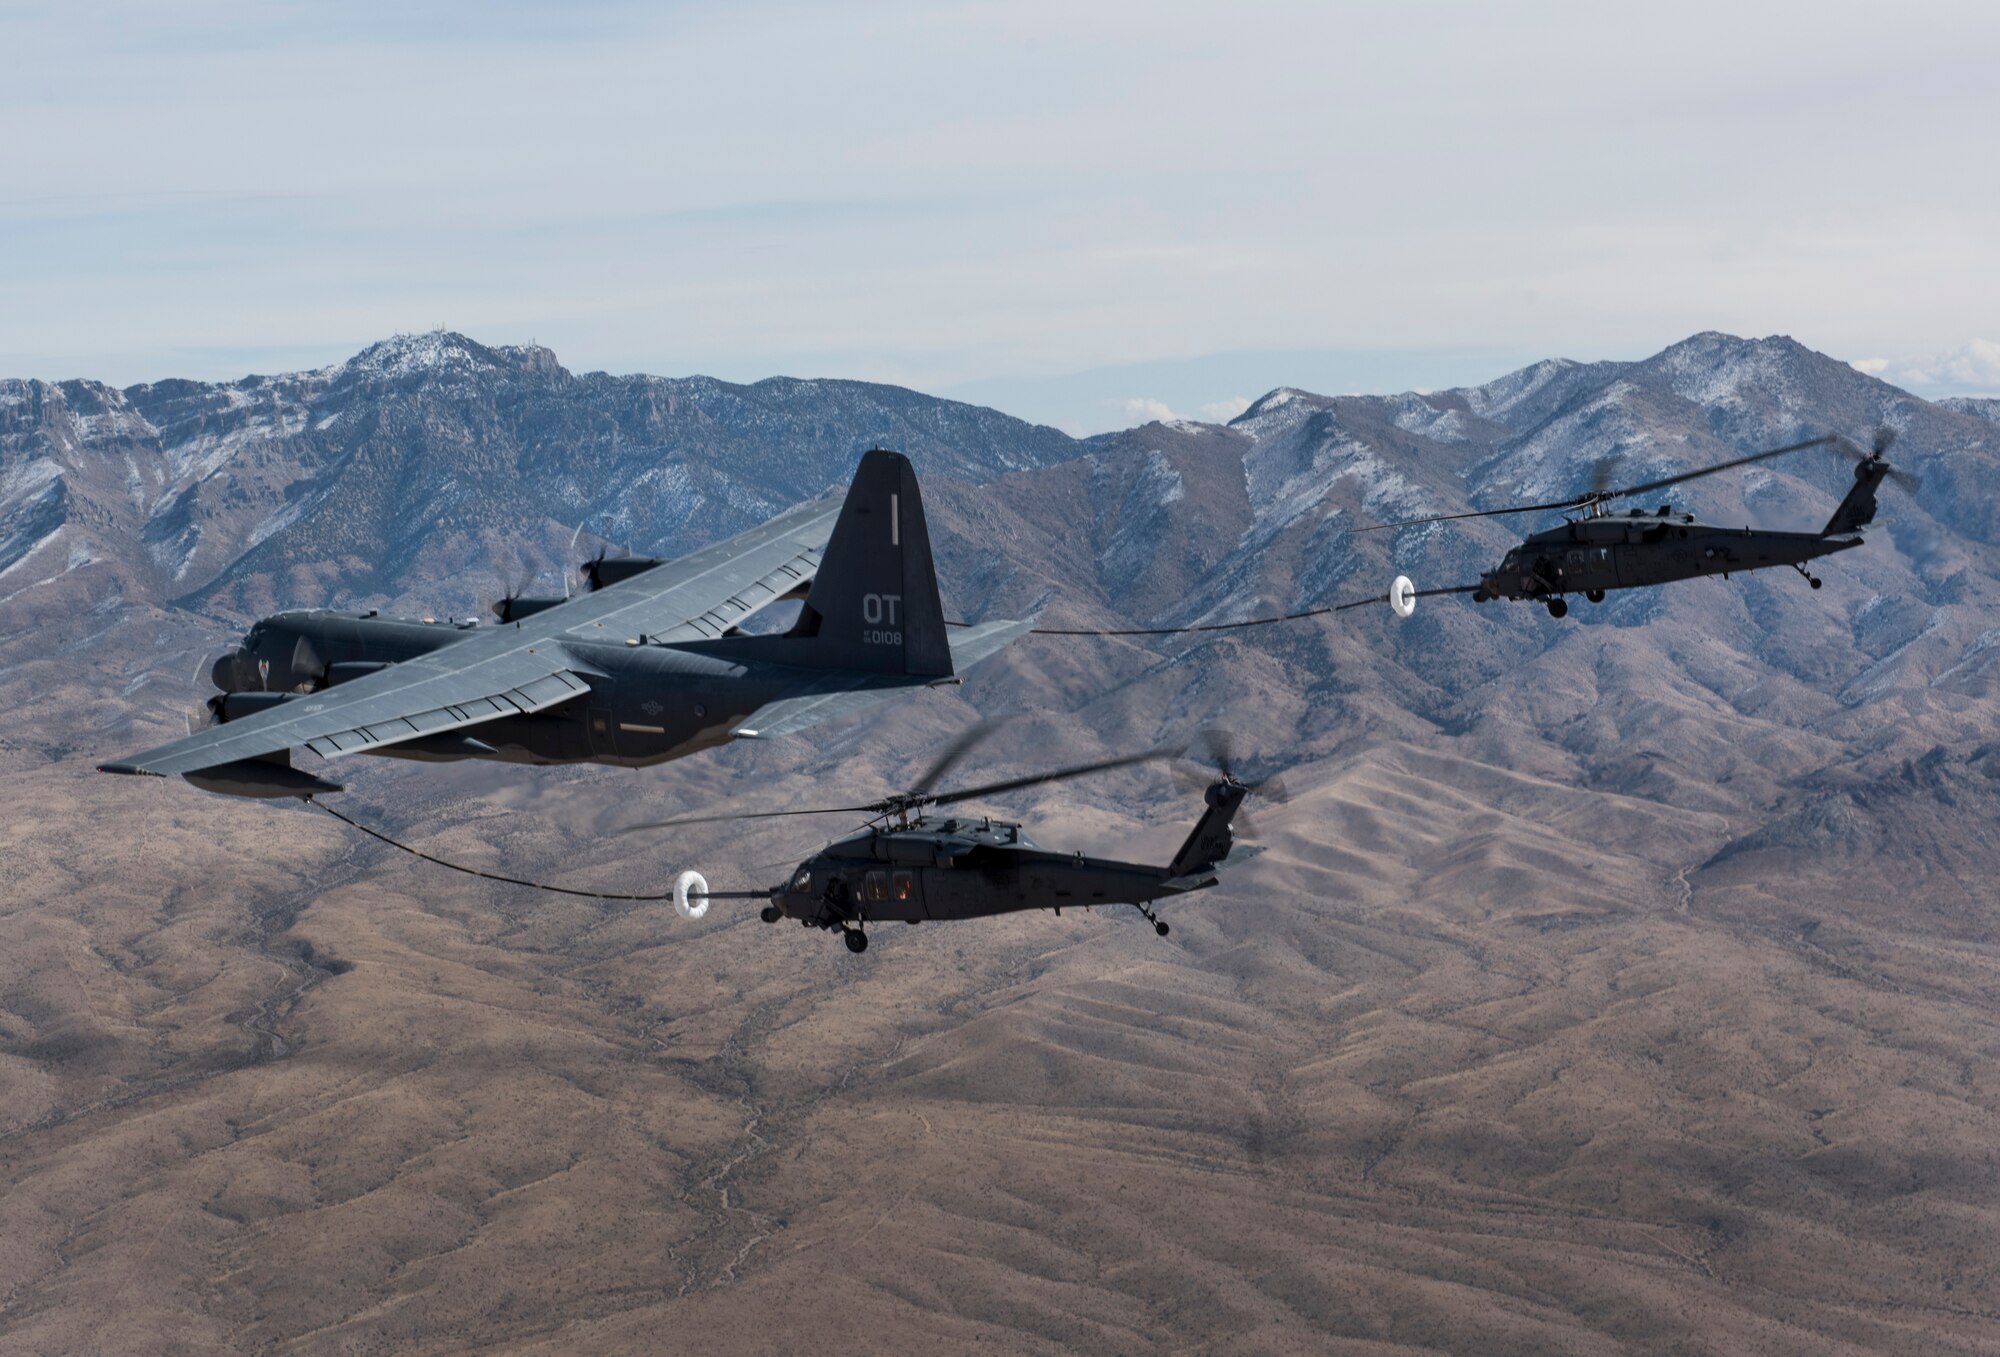 A pair of HH-60 Pave Hawk helicopters receive fuel from a HC-130J Combat King II during a training mission over the Nevada Test and Training Range Feb. 22, 2018. The HC-130J is designed to conduct personnel recovery missions, provide a command and control platform, in-flight refuel helicopters, and carry supplemental fuel for extending range or air refueling. (U.S. Air Force photo by Senior Airman Kevin Tanenbaum)